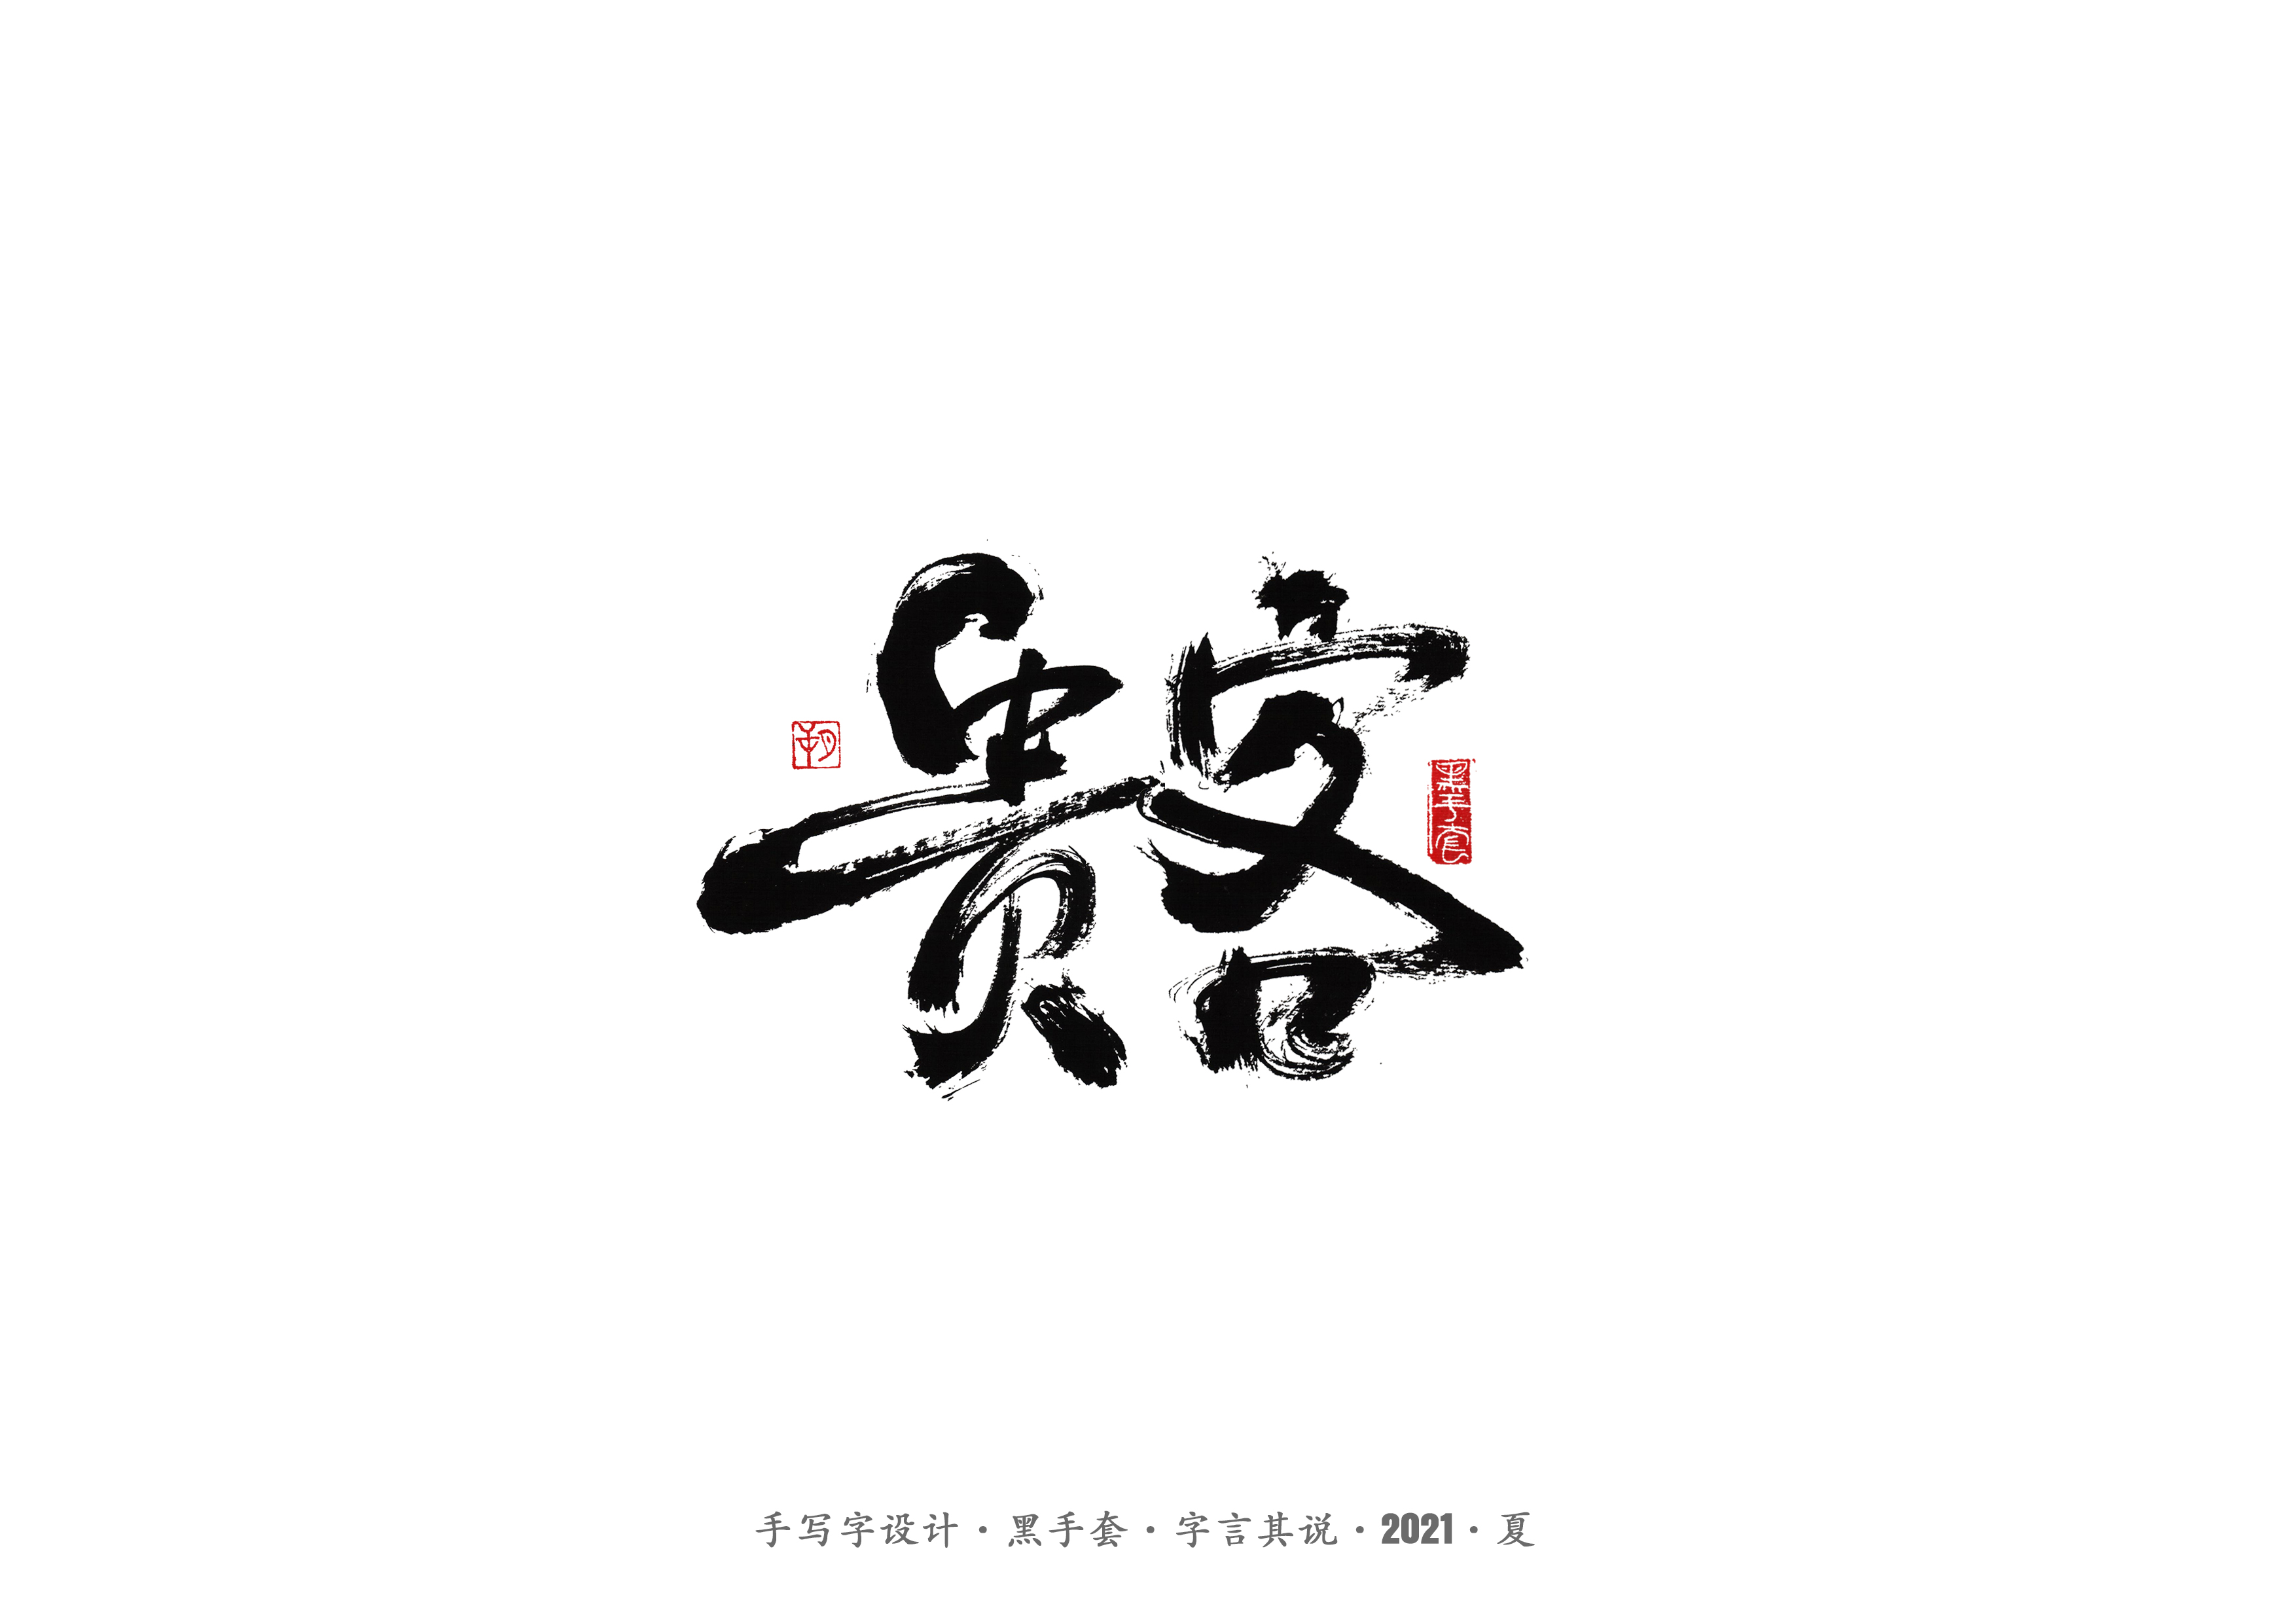 14P Collection of the latest Chinese font design schemes in 2021 #.209